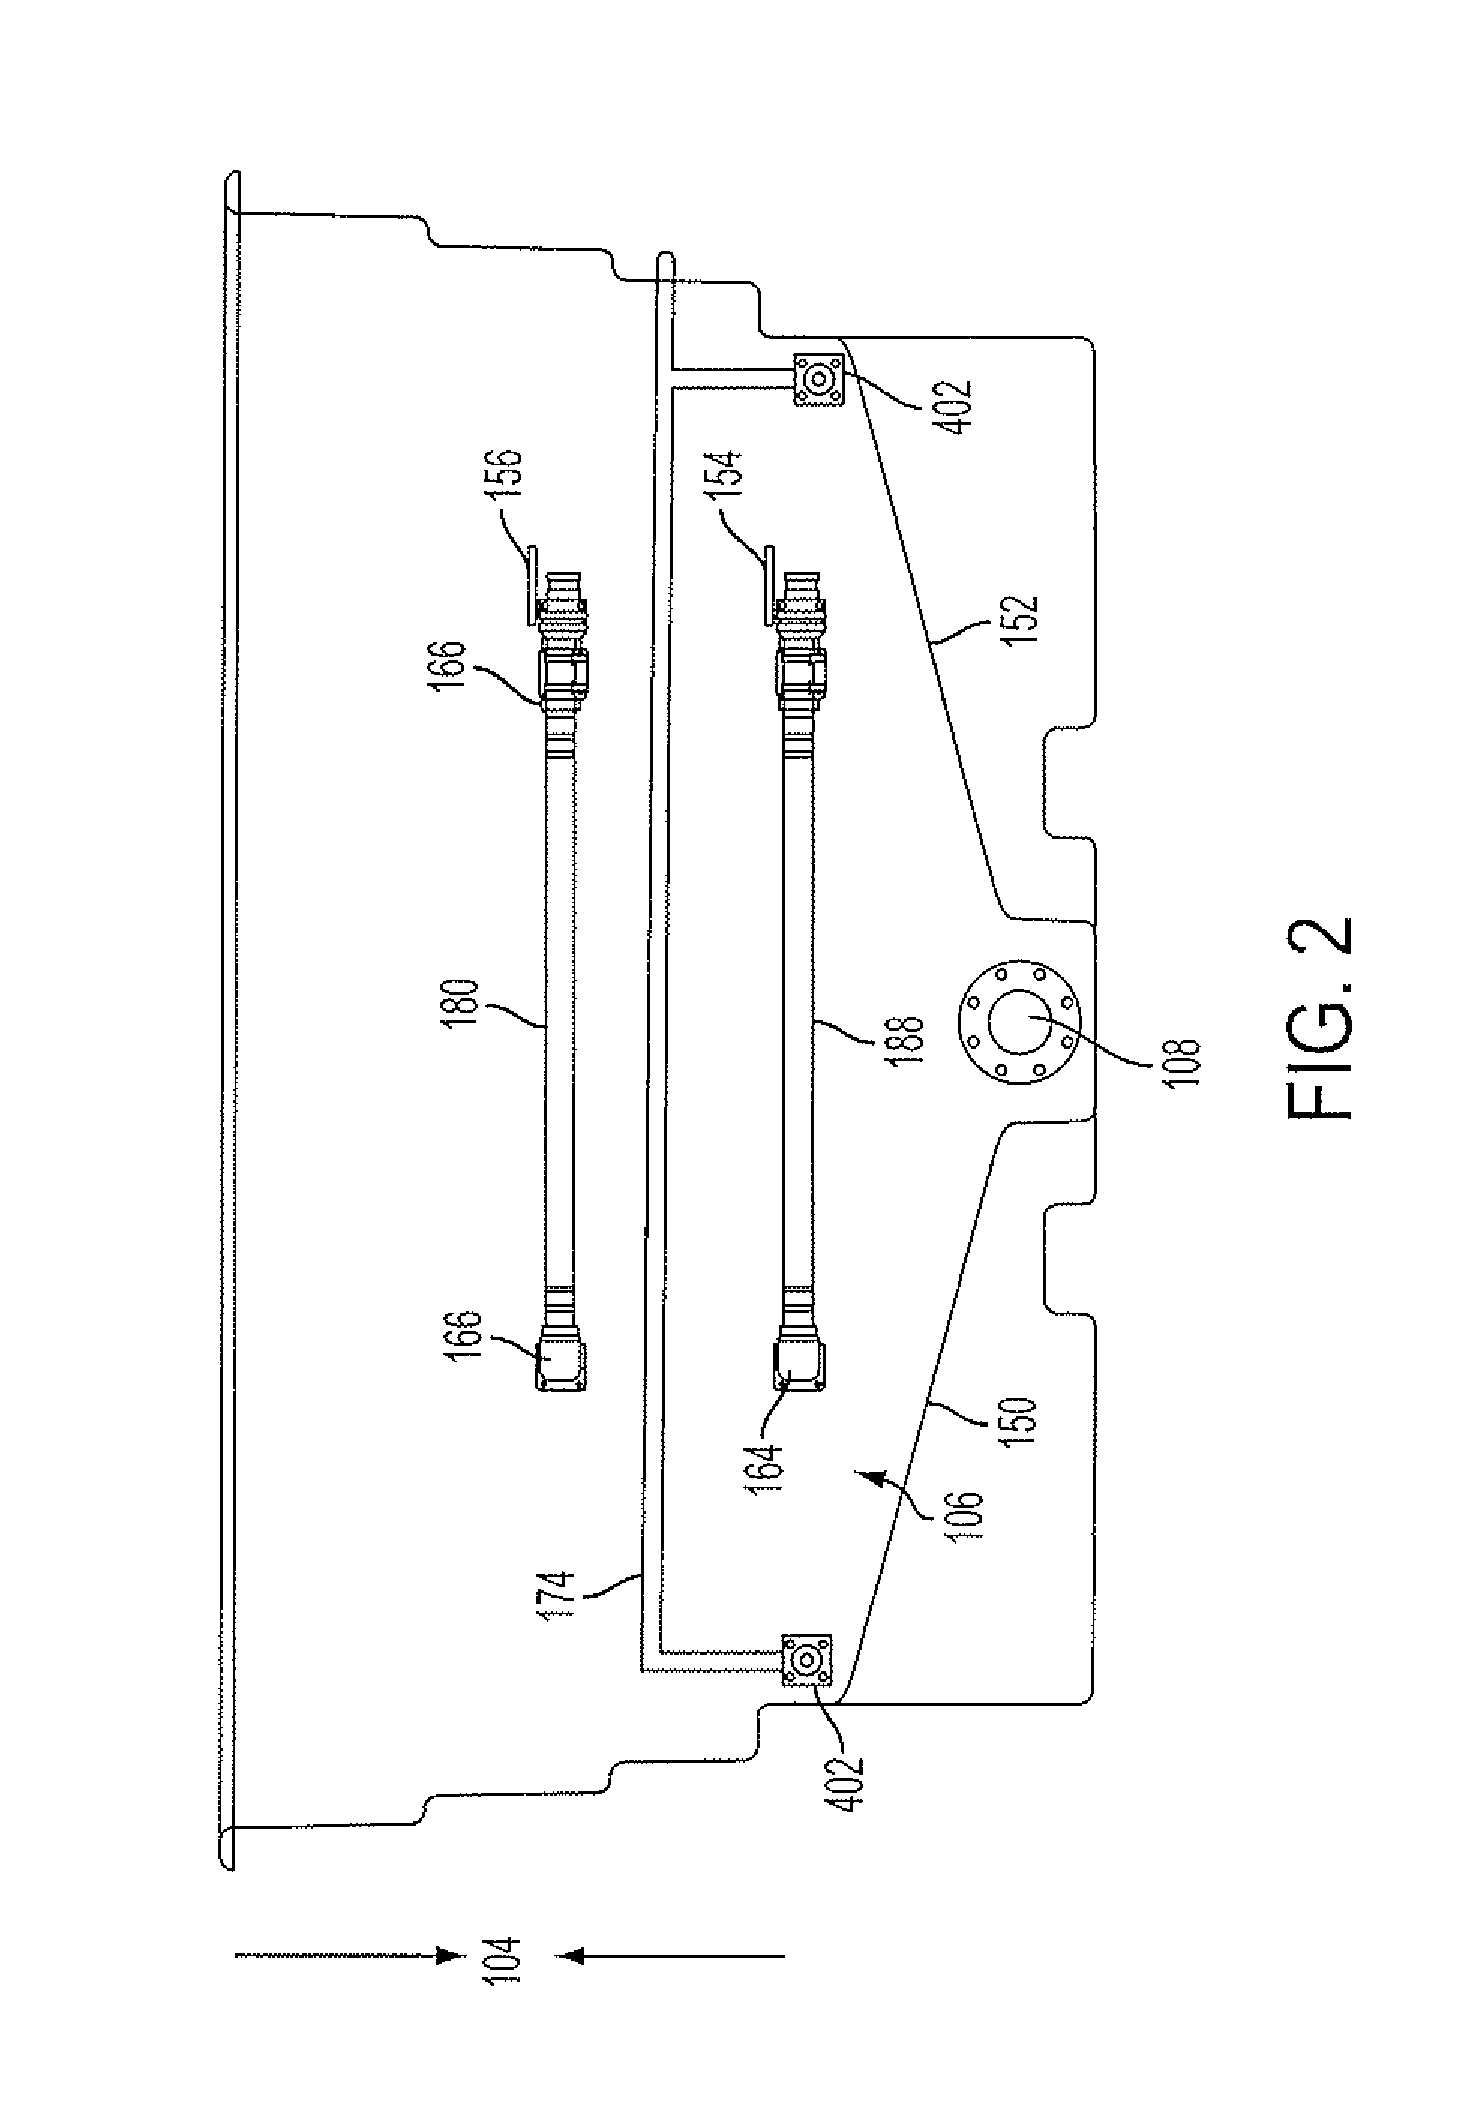 Solution making system and method